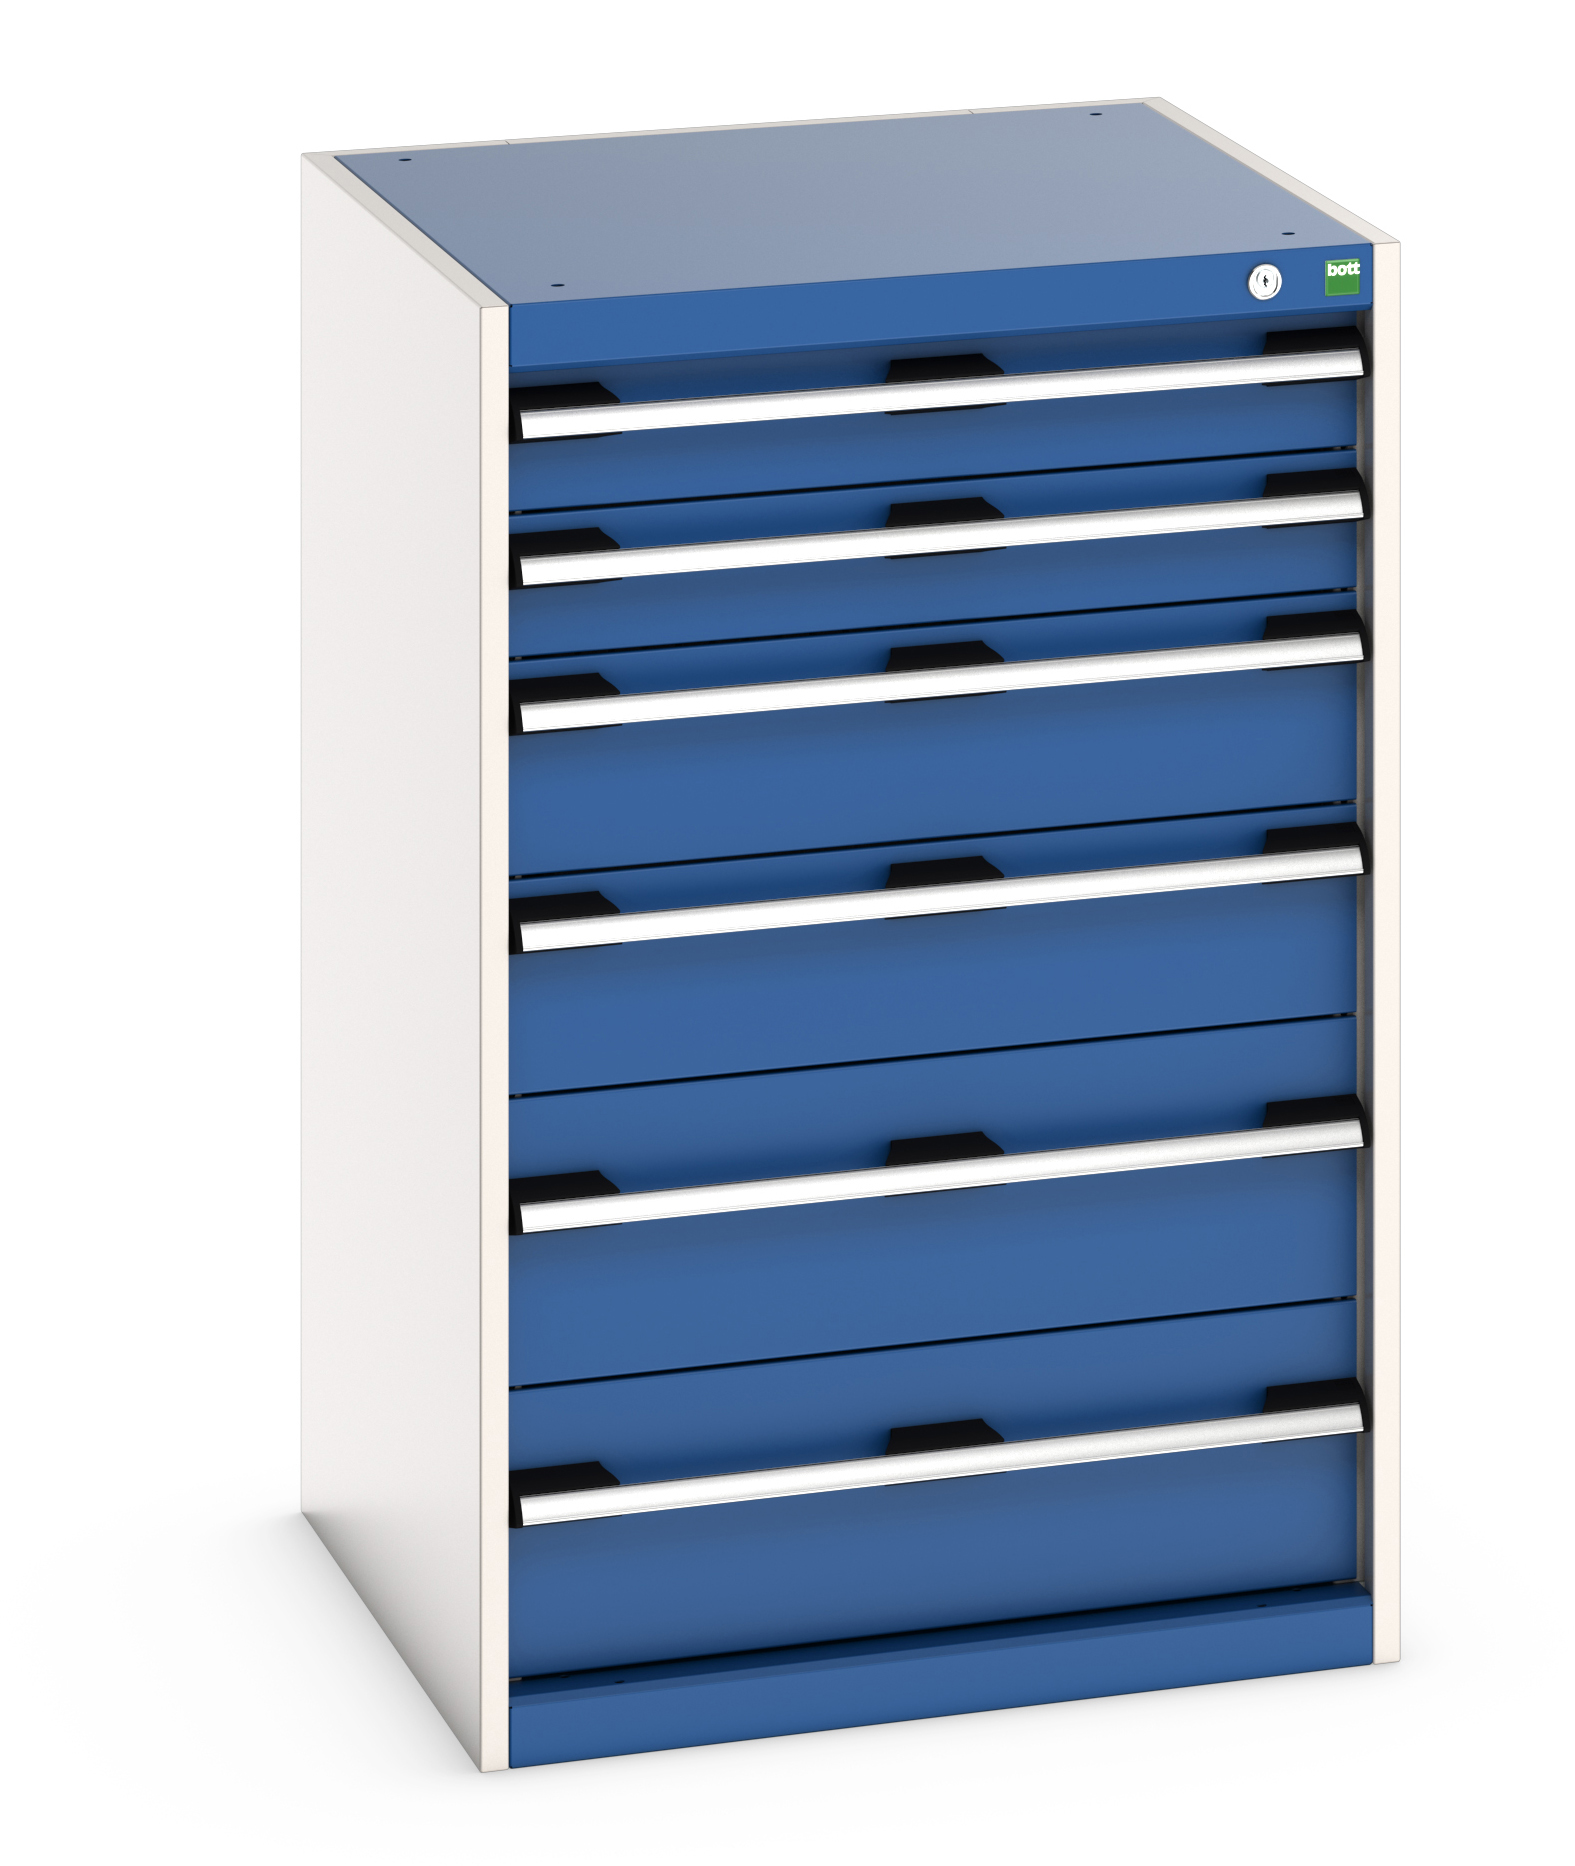 Bott Cubio Drawer Cabinet With 6 Drawers - 40019059.11V